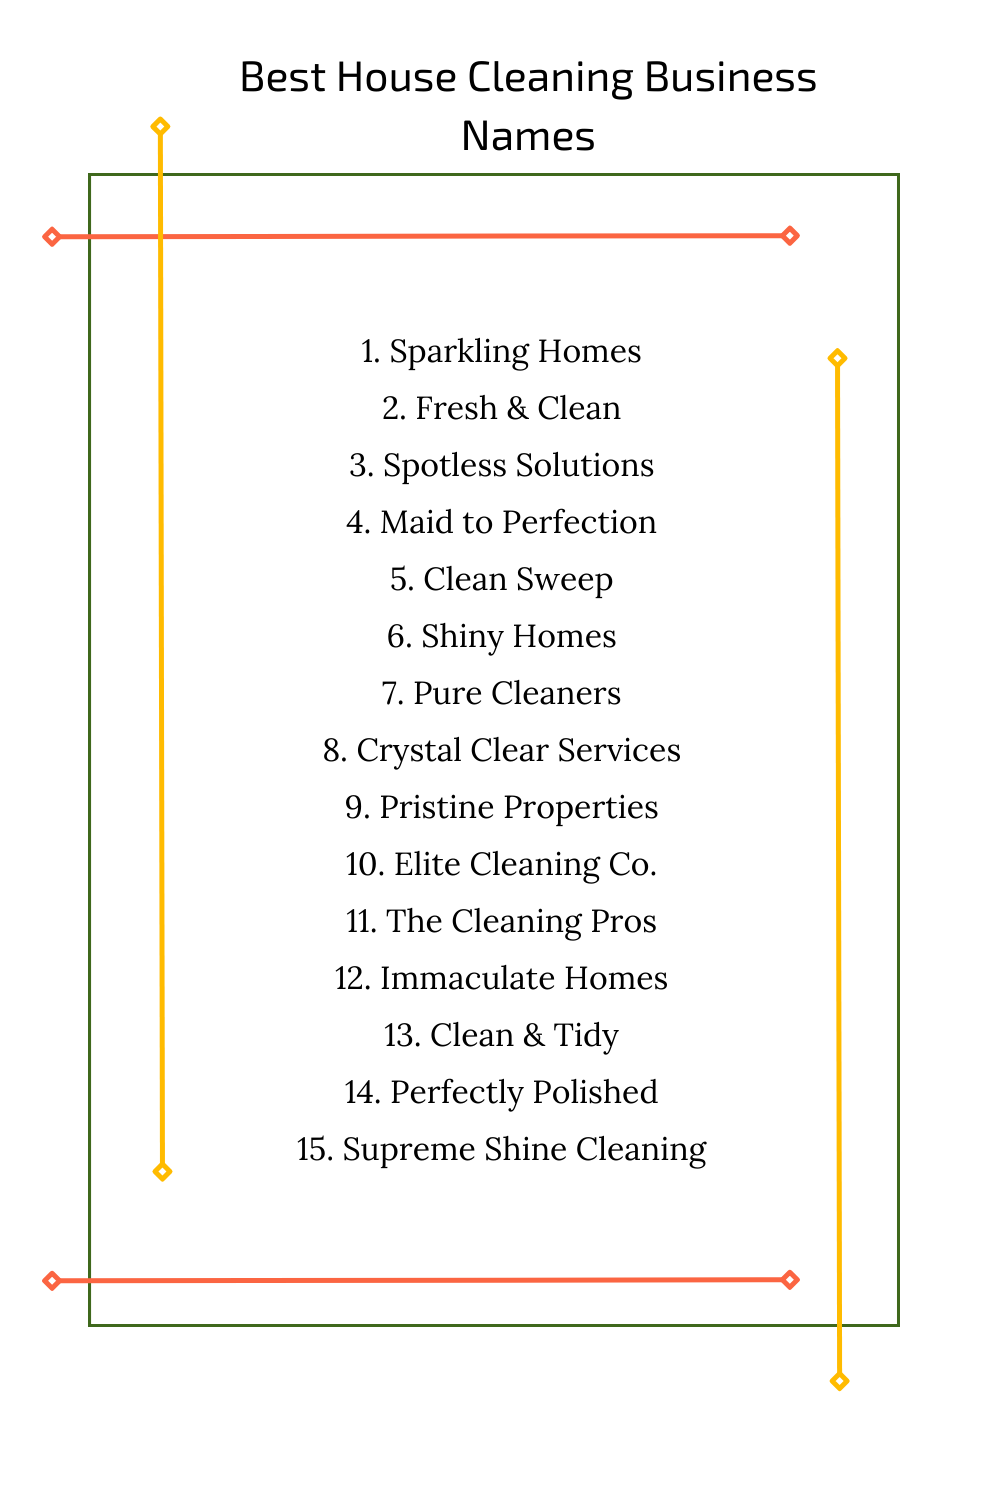 Best House Cleaning Business Names